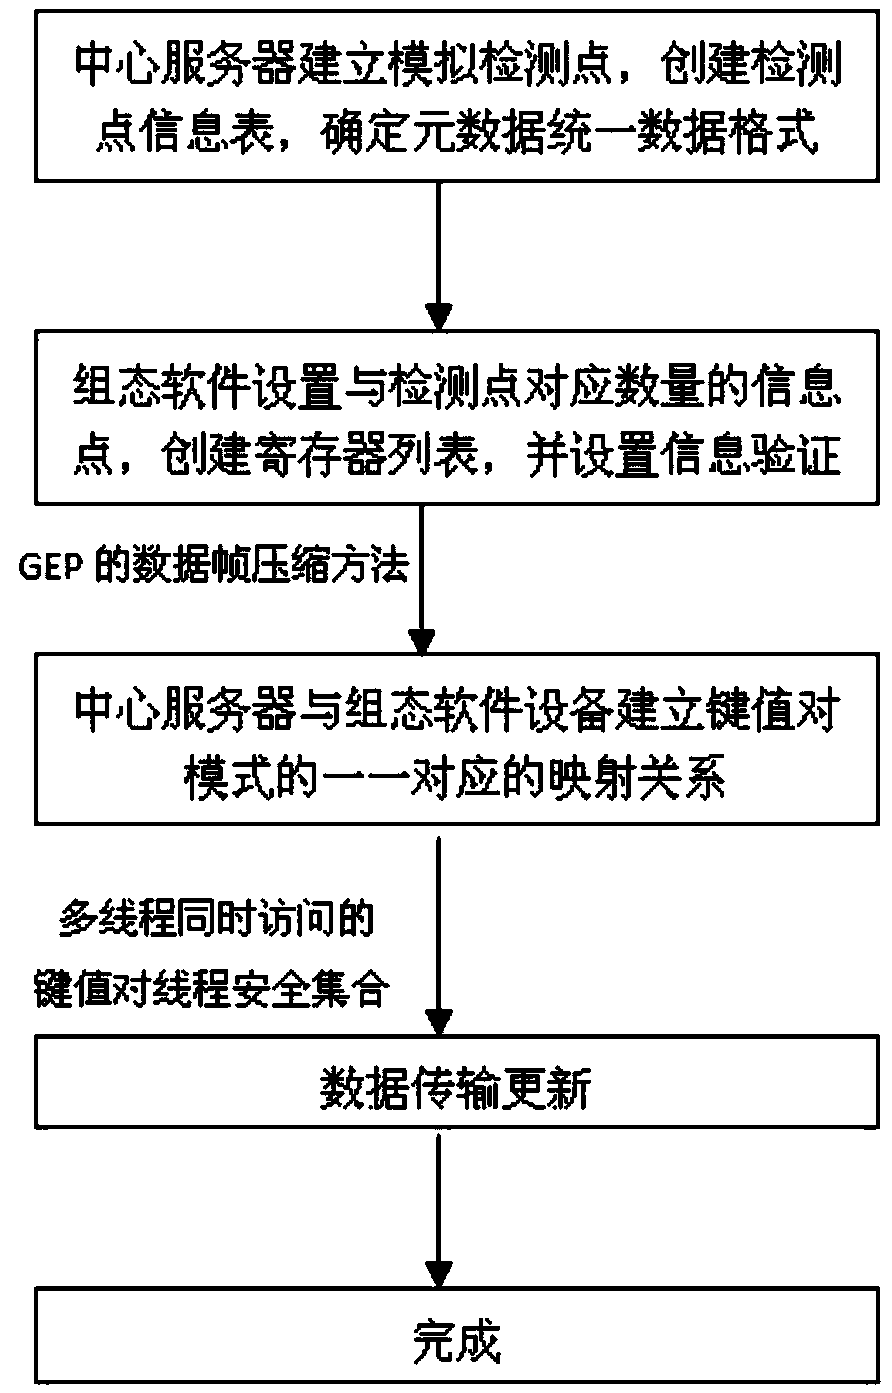 Concurrence real-time data transmission interface implementation method based on configuration software